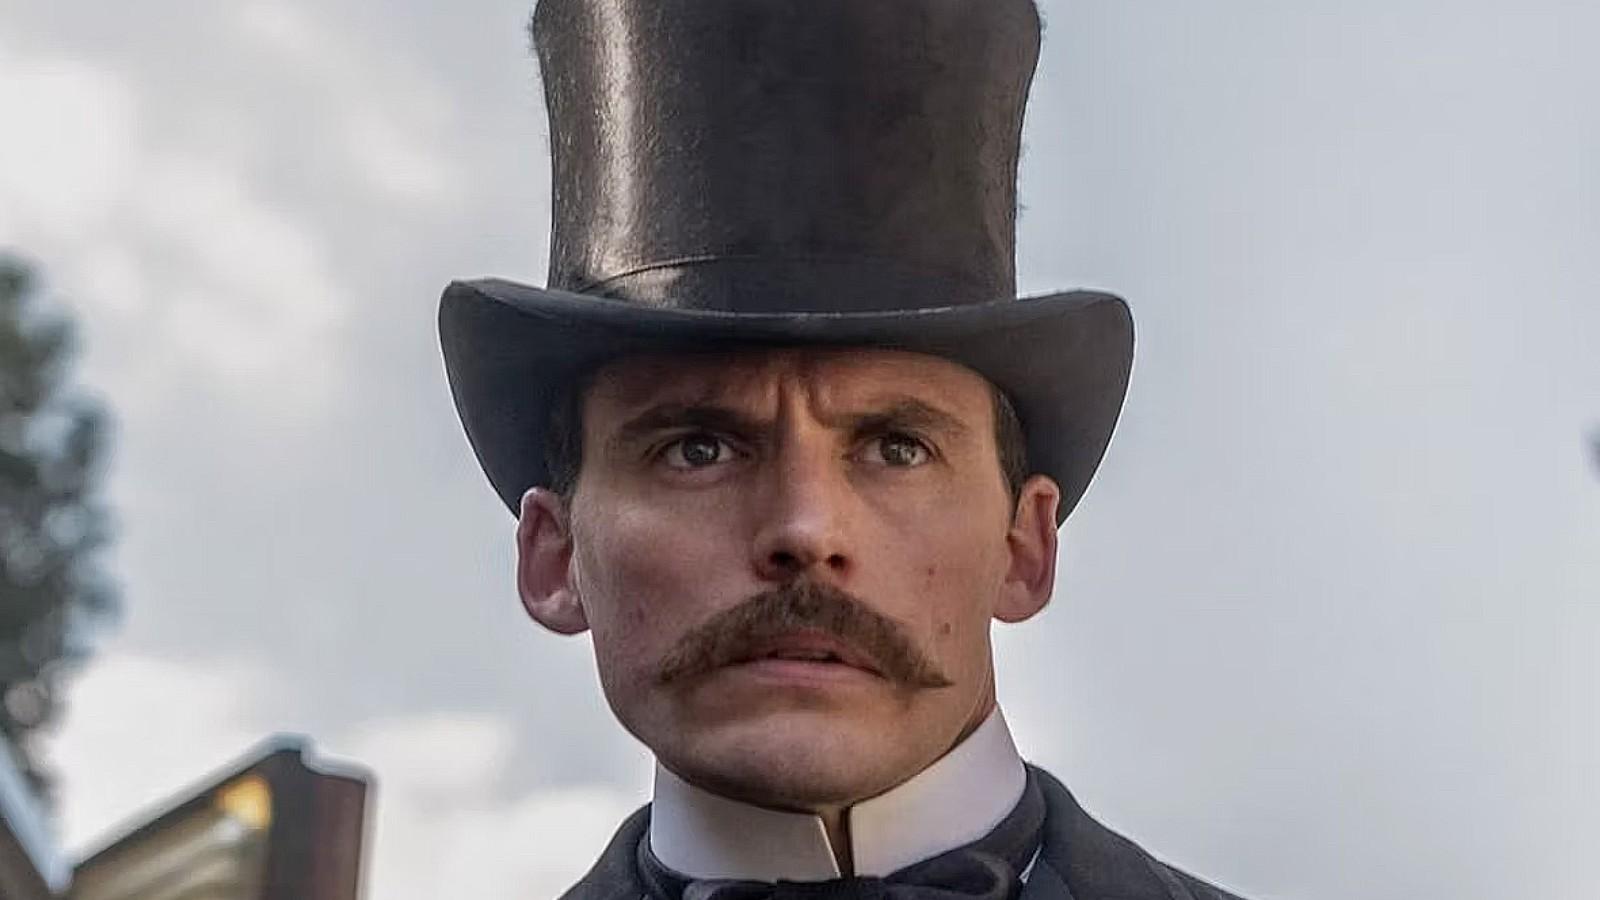 Henry Cavill Speaks Out on Sherlock Holmes Movie After Enola Holmes 2